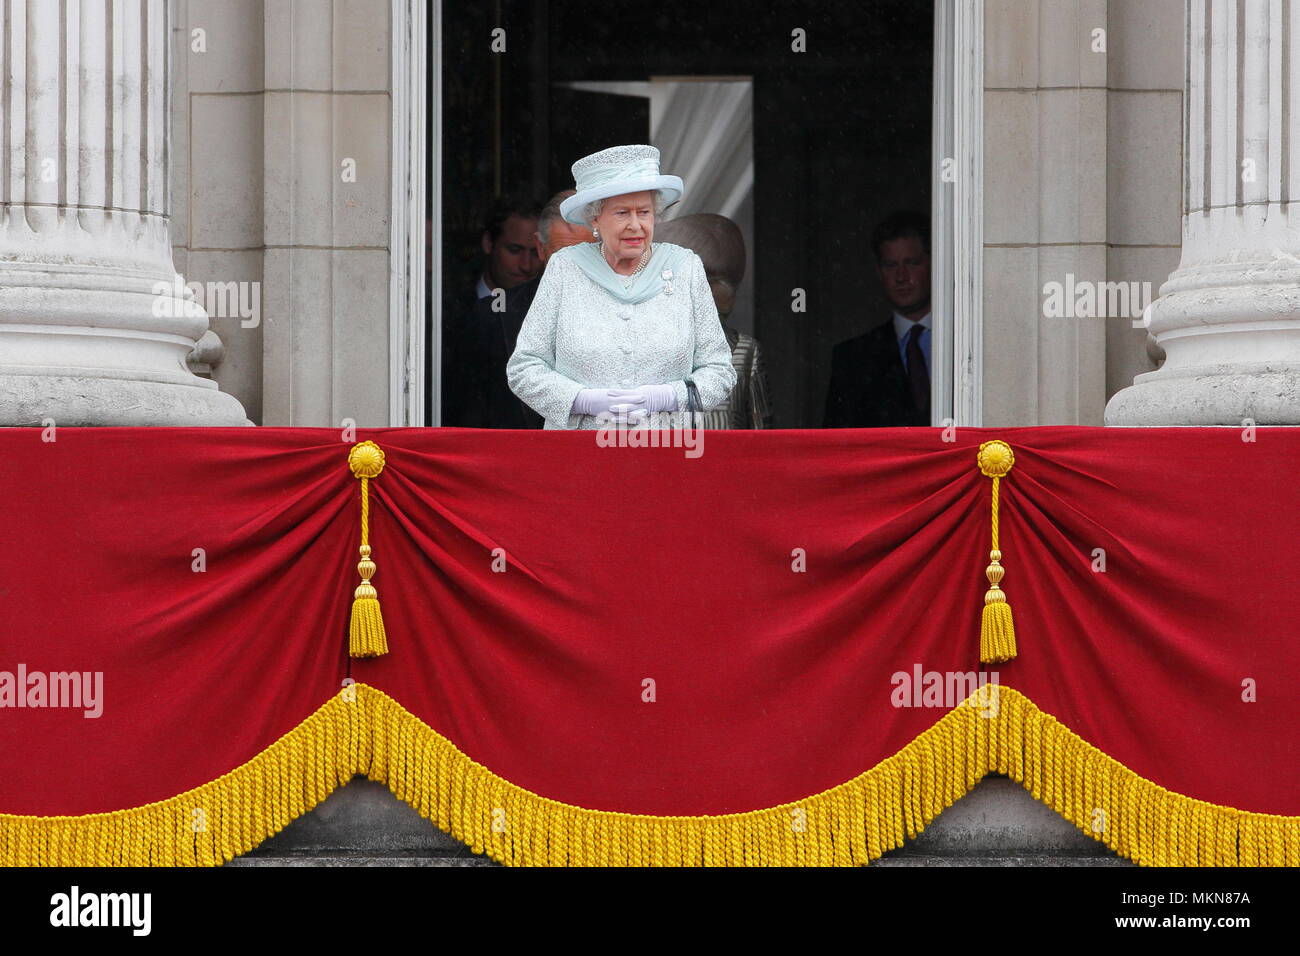 Queen Elizabeth II with future kings - Prince Charles and Prince  William on the balcony of Buckingham Palace to commemorate the 60th anniversary of the accession of the Queen, London. 5 June 2012 --- Image by © Paul Cunningham Stock Photo